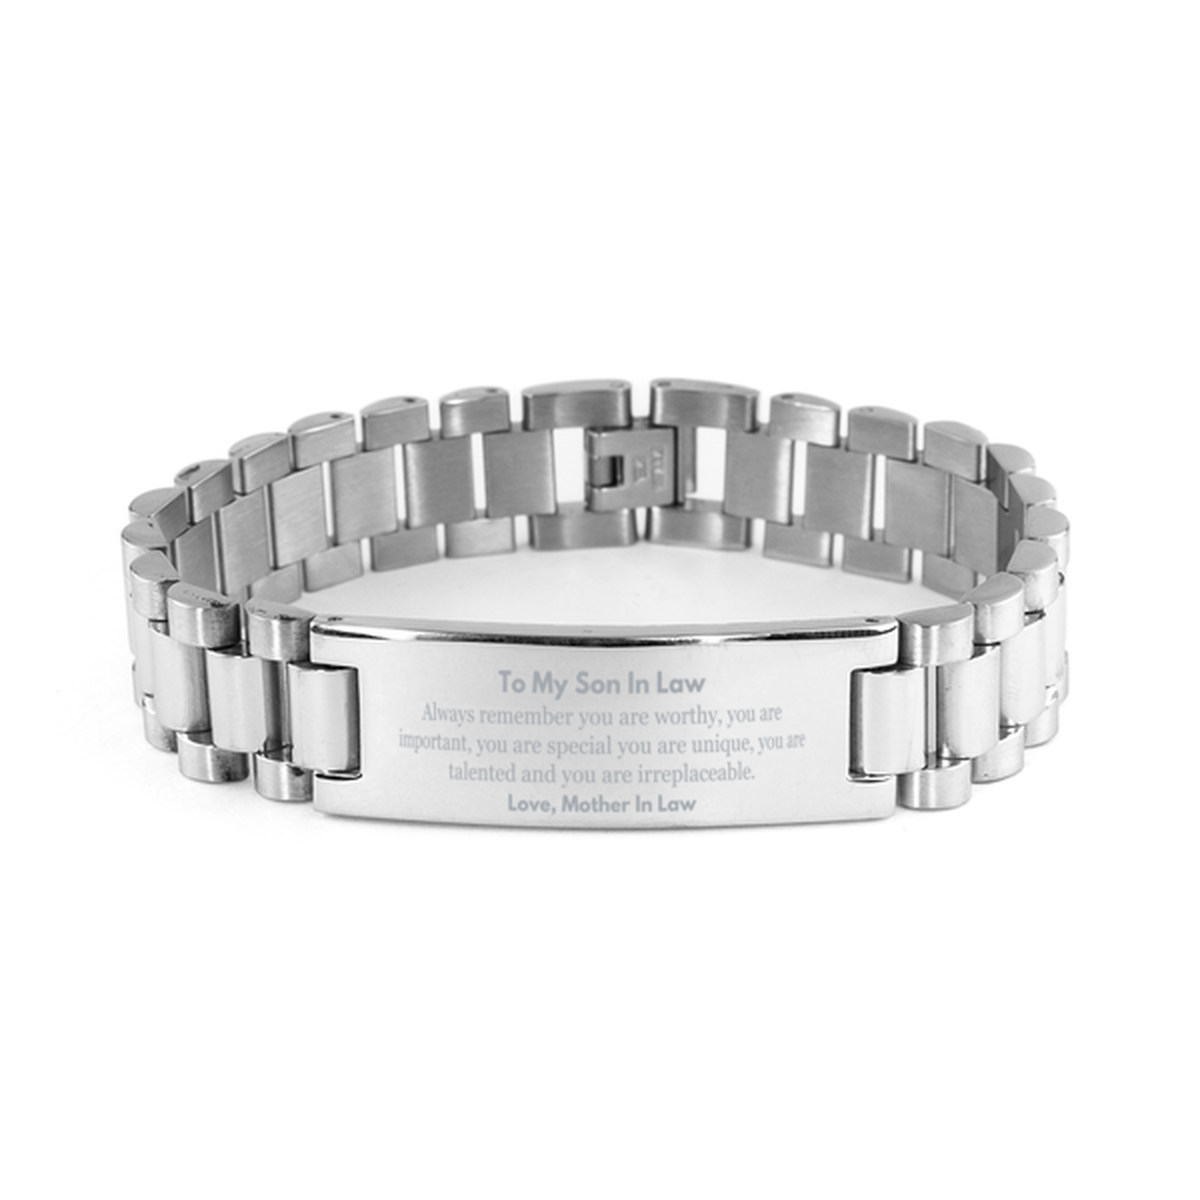 Son In Law Birthday Gifts from Mother In Law, Inspirational Ladder Stainless Steel Bracelet for Son In Law Christmas Graduation Gifts for Son In Law Always remember you are worthy, you are important. Love, Mother In Law